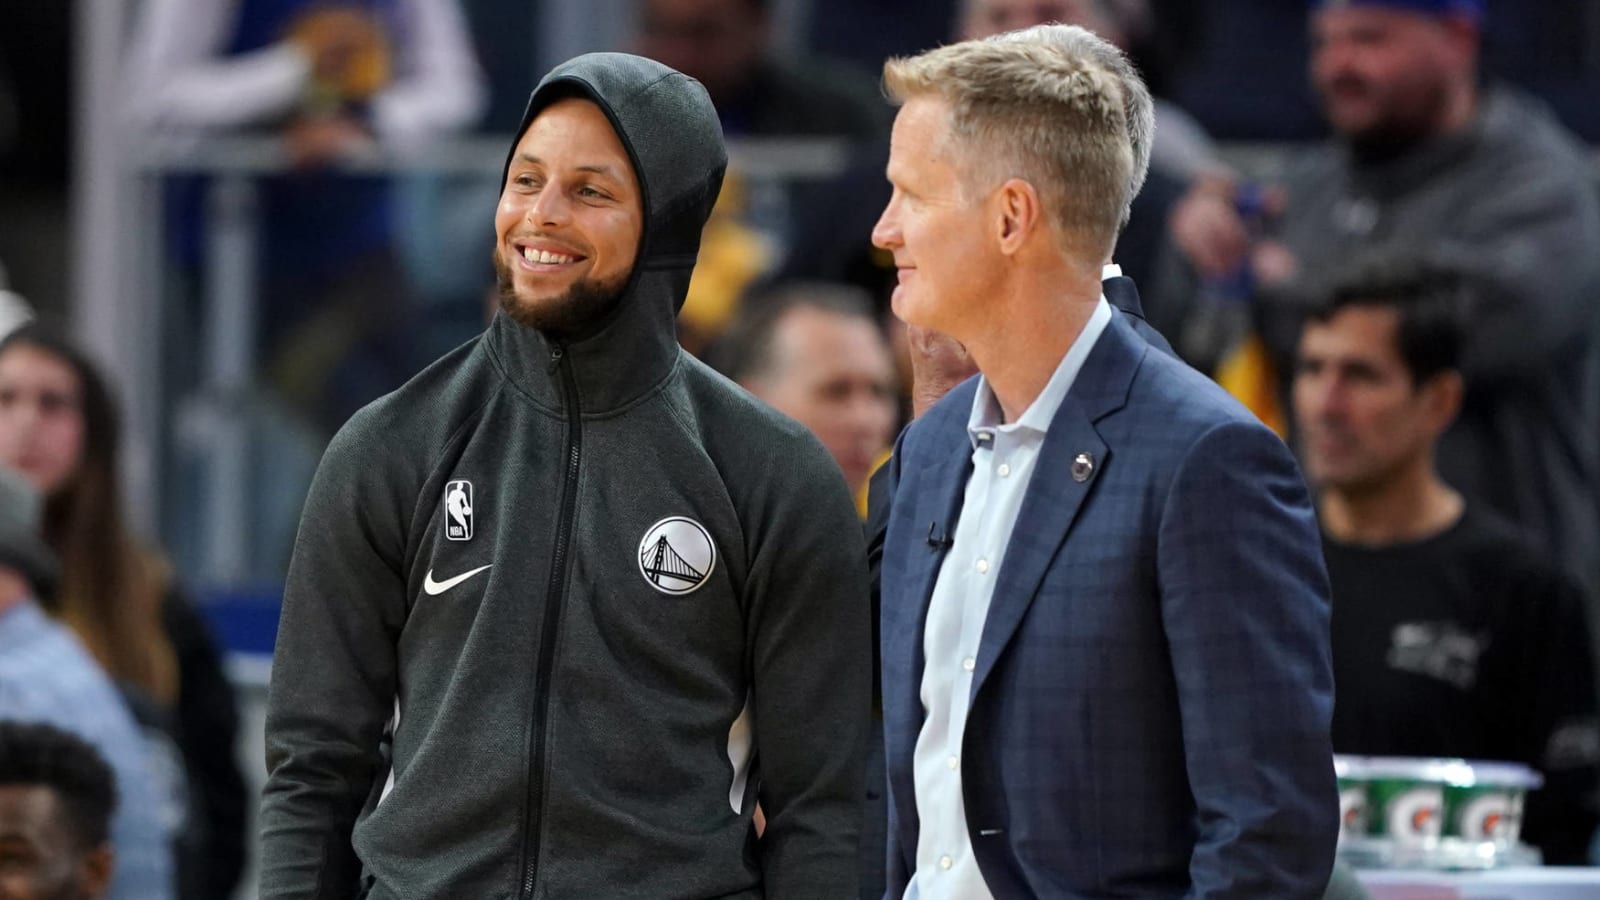 Steve Kerr cracks funny joke about Steph Curry playing in G League